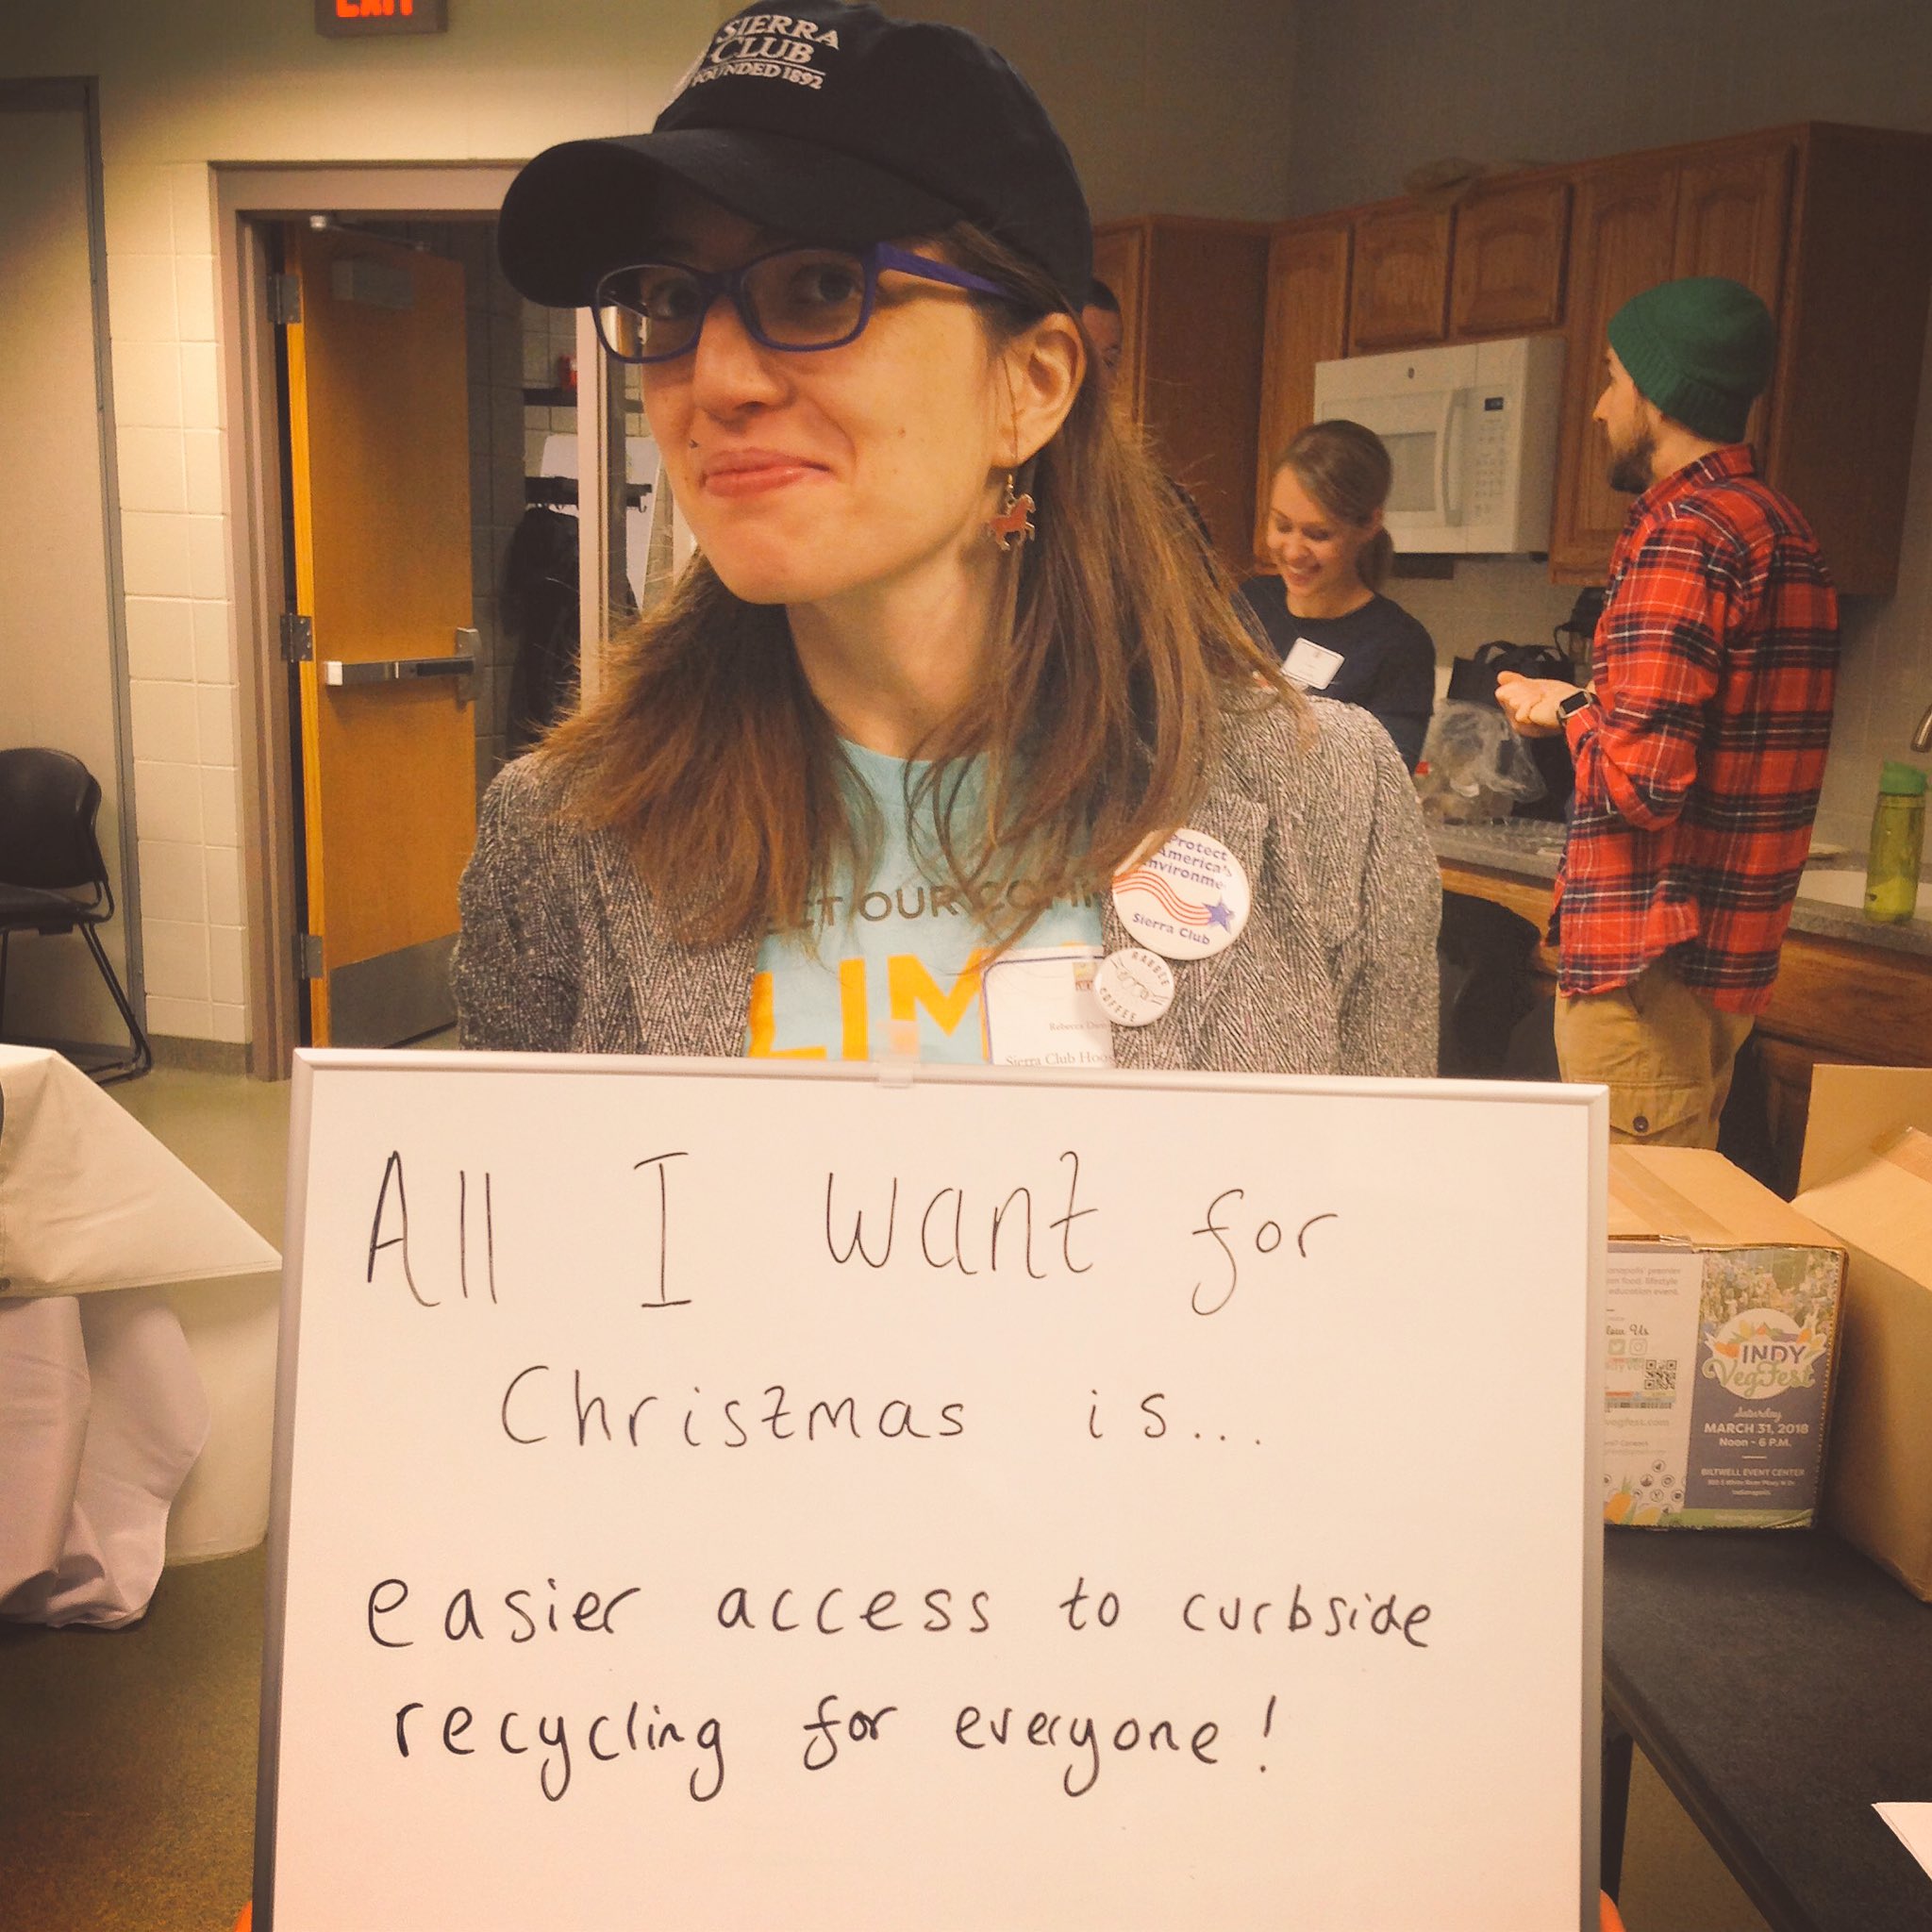 Rebecca from the Hoosier Chapter holds a sign saying "all I want for Christmas is easier access to curbside recycling for everyone"